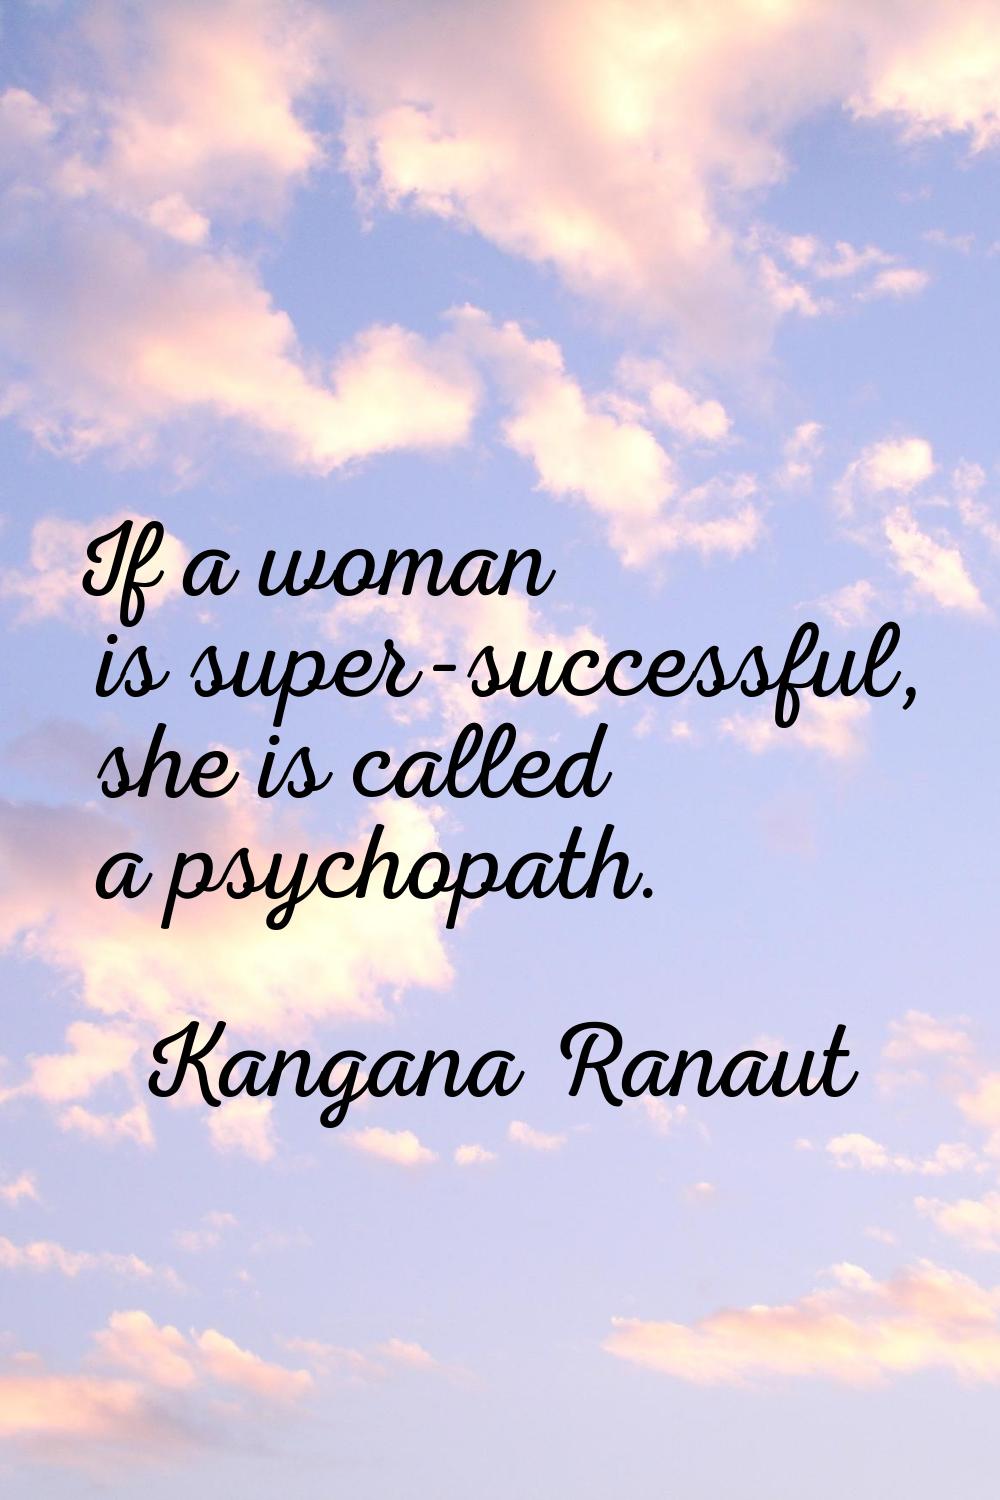 If a woman is super-successful, she is called a psychopath.